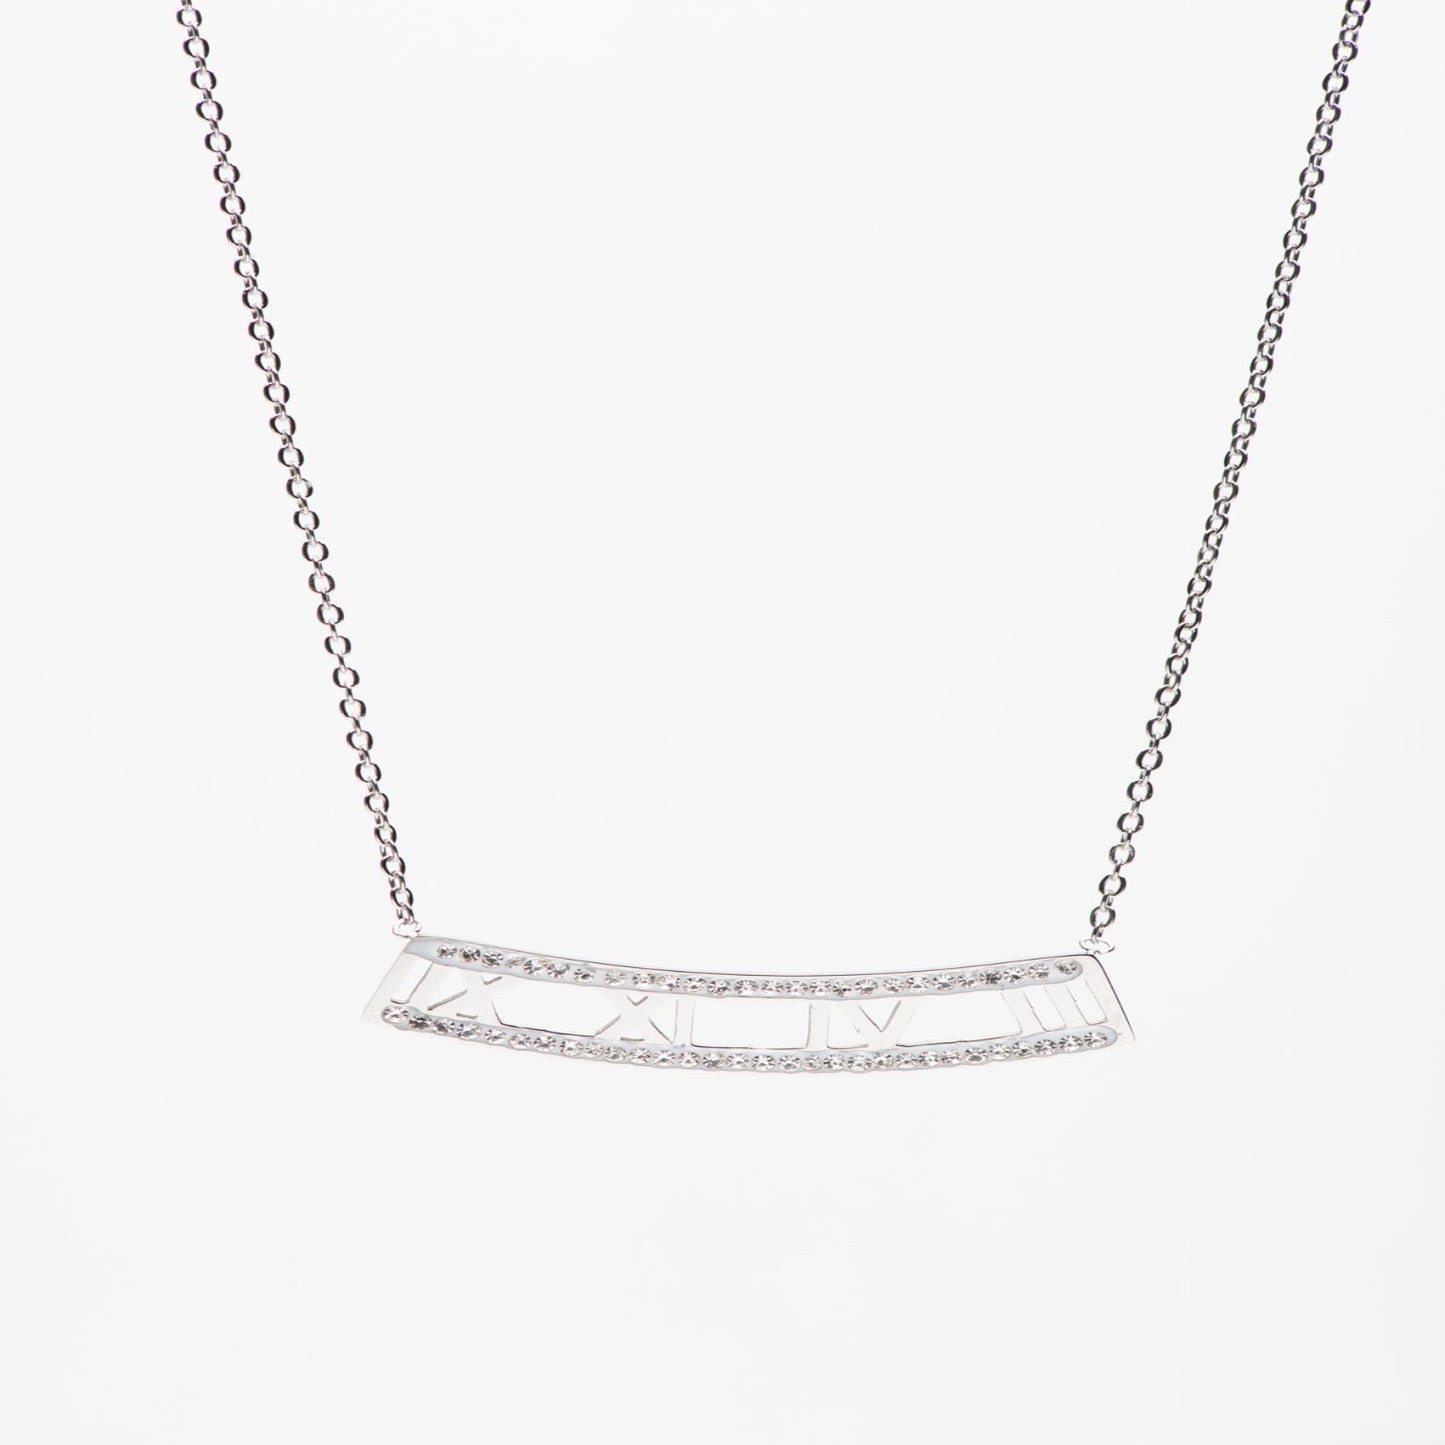 Stainless Steel bar necklace with Roman numerals